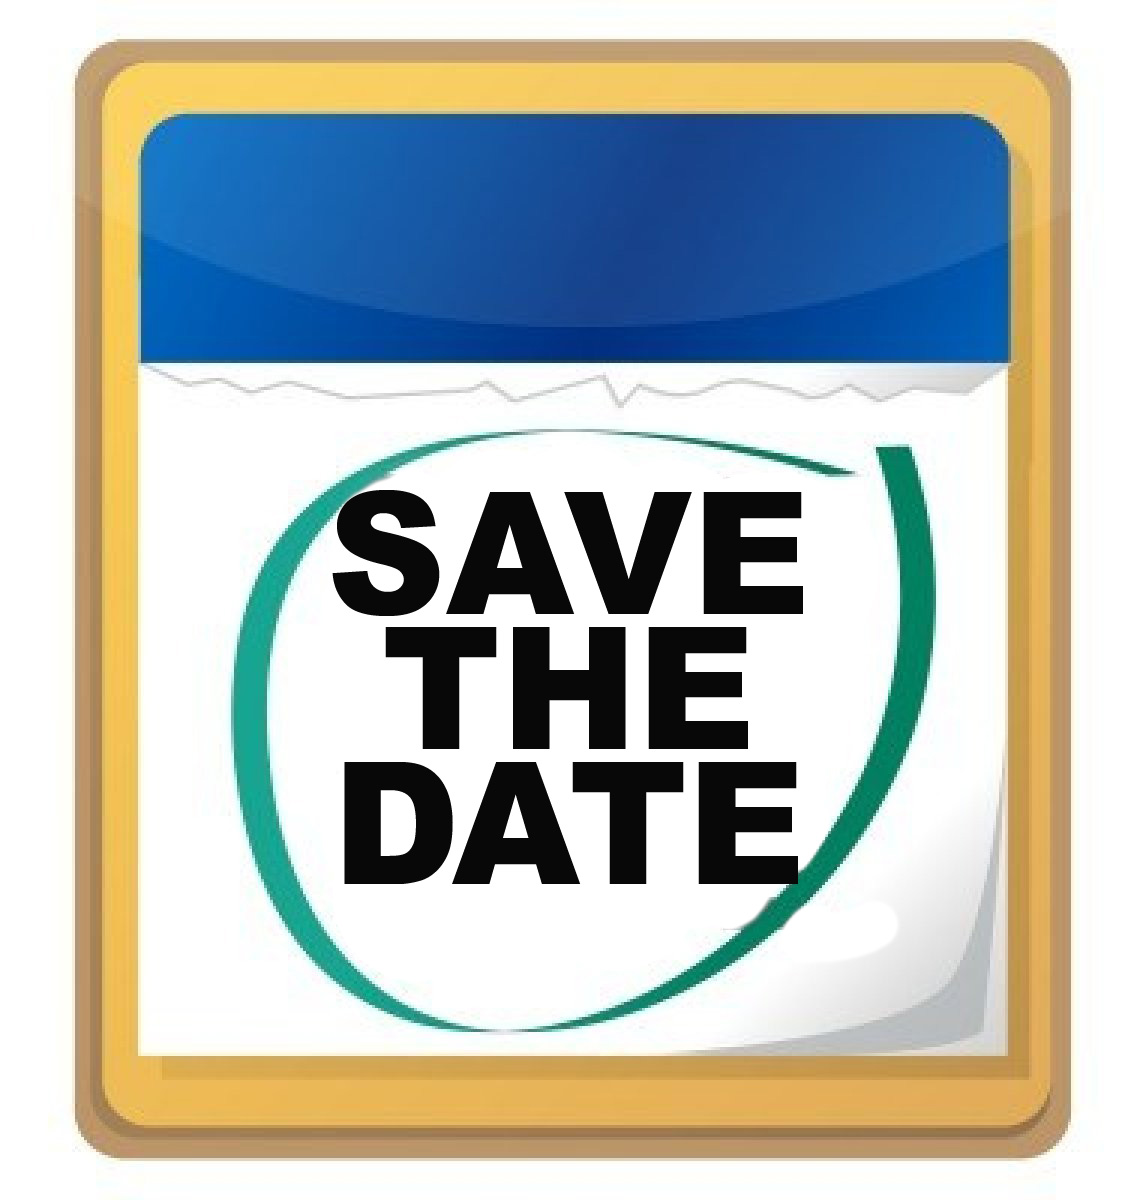 Free Save The Date Clipart Pictures - Clipartix